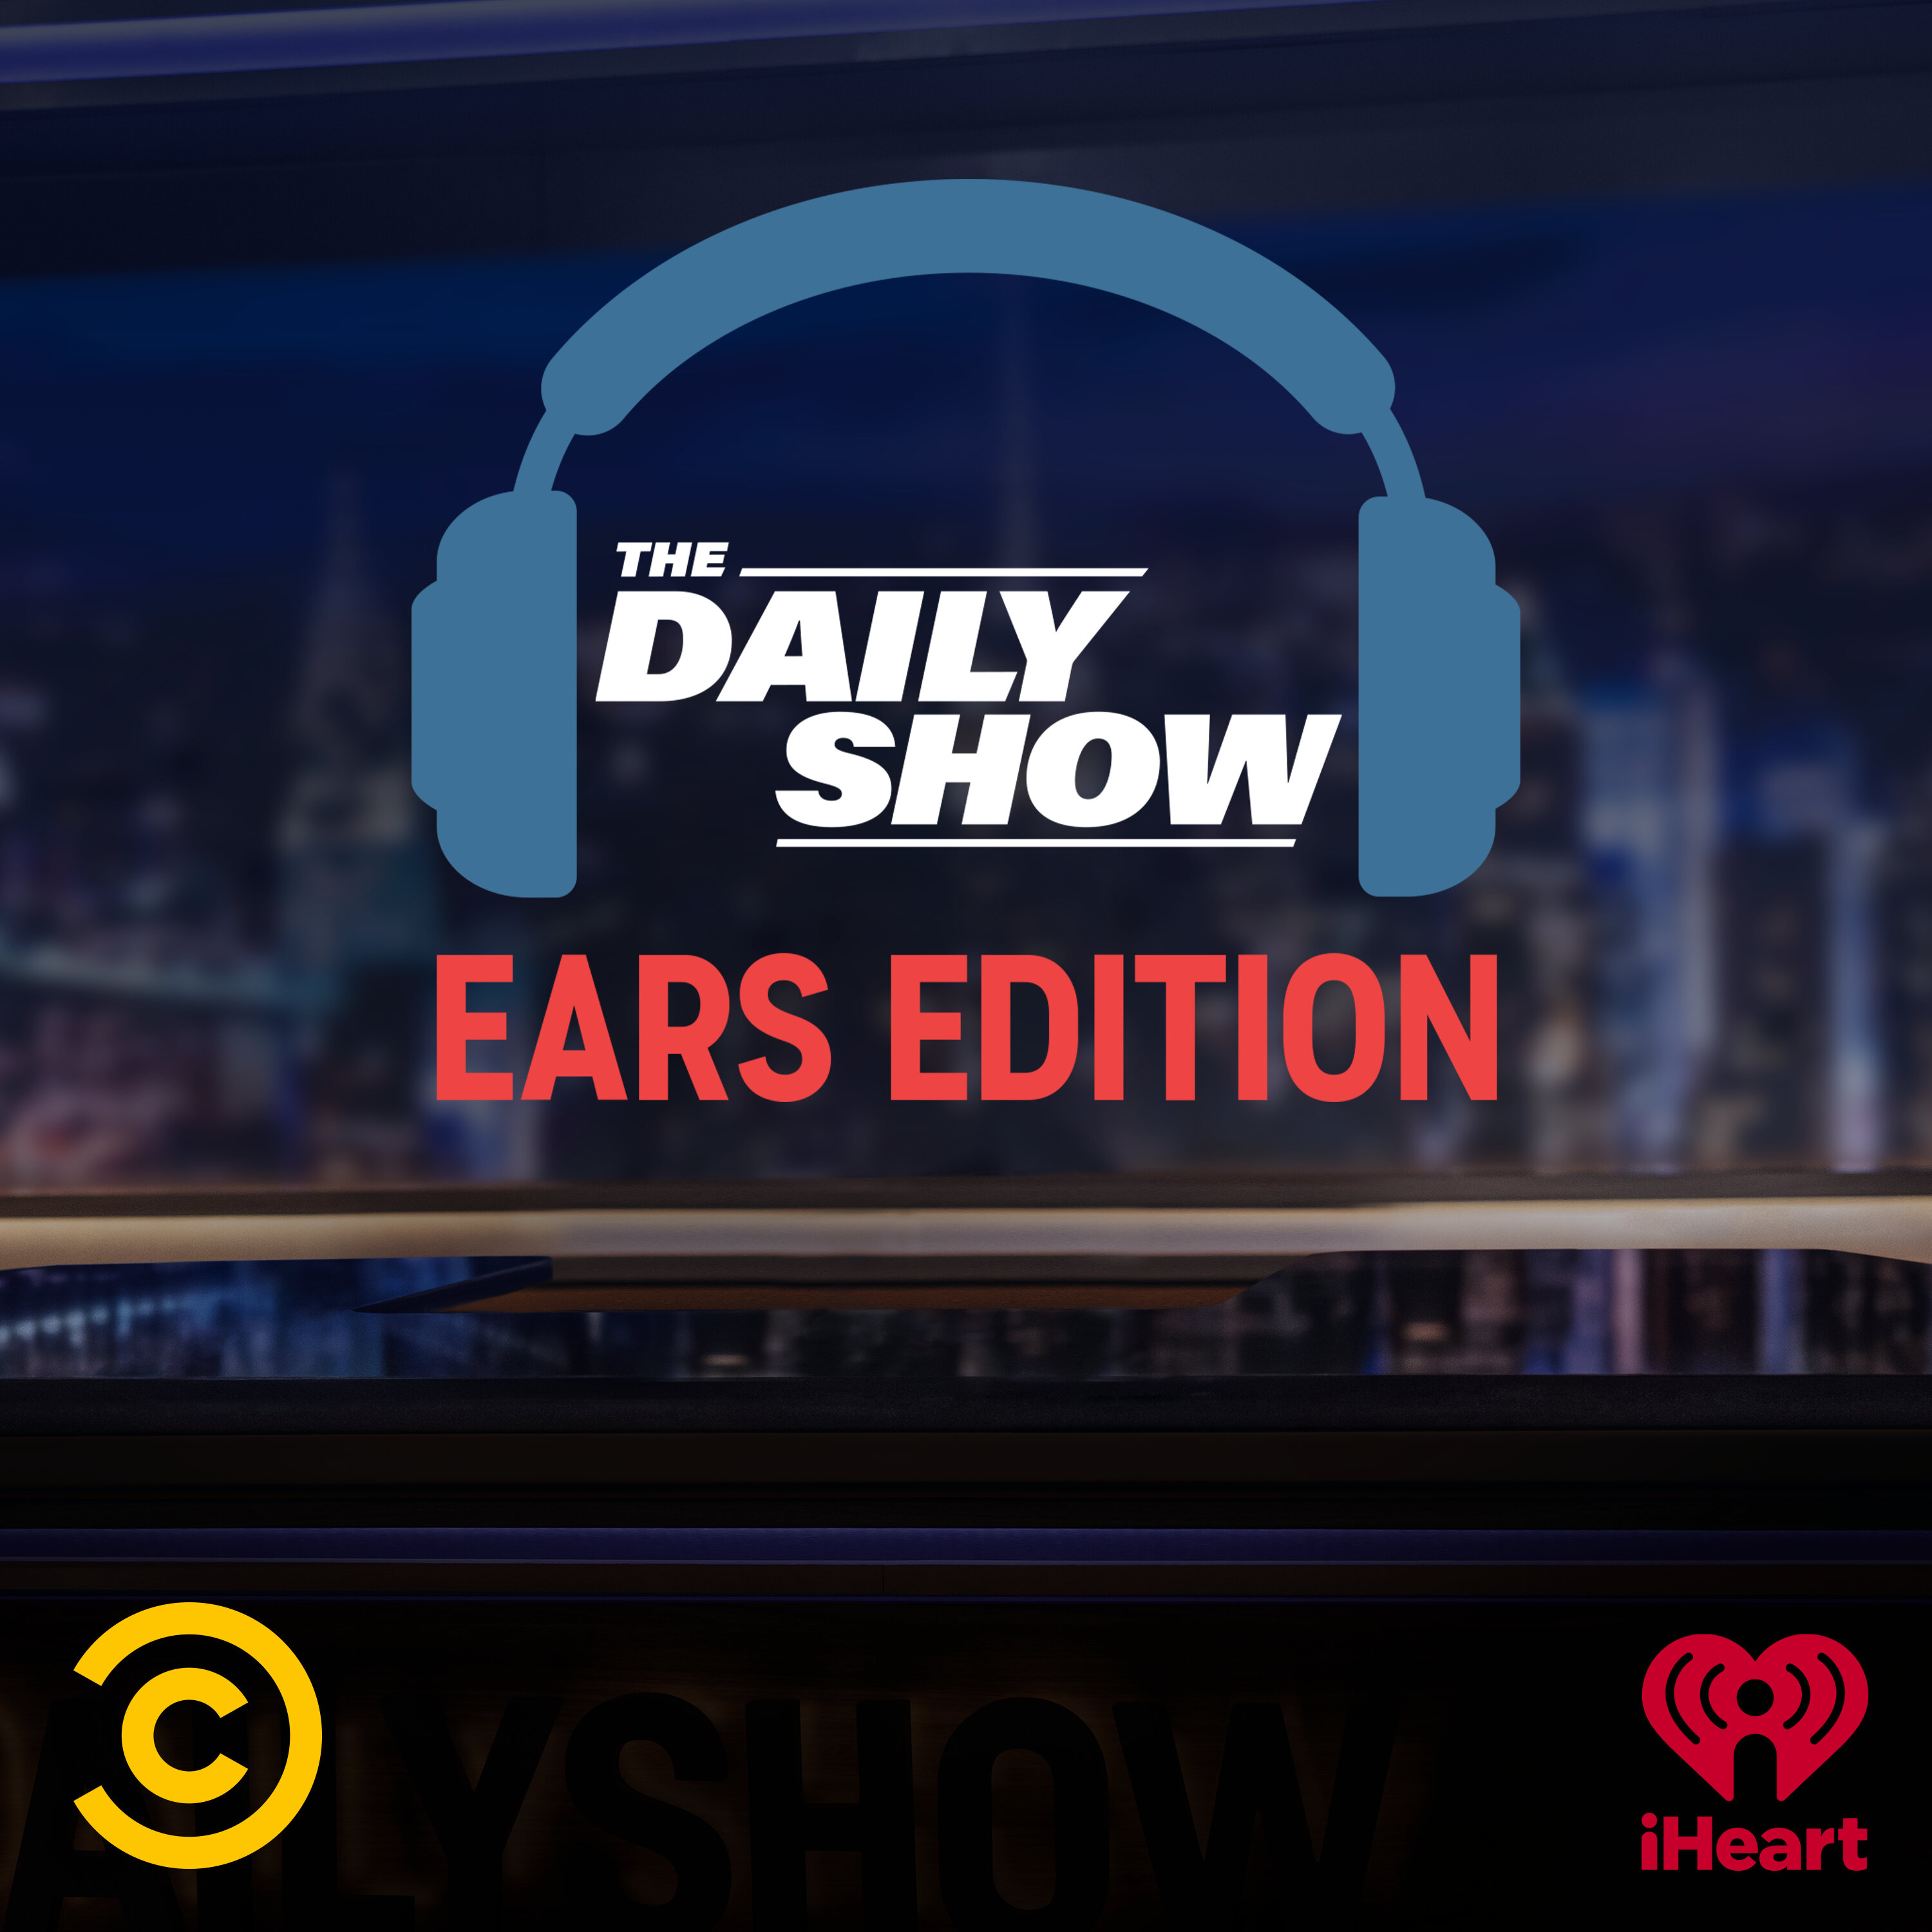 The Daily Show: Ears Edition